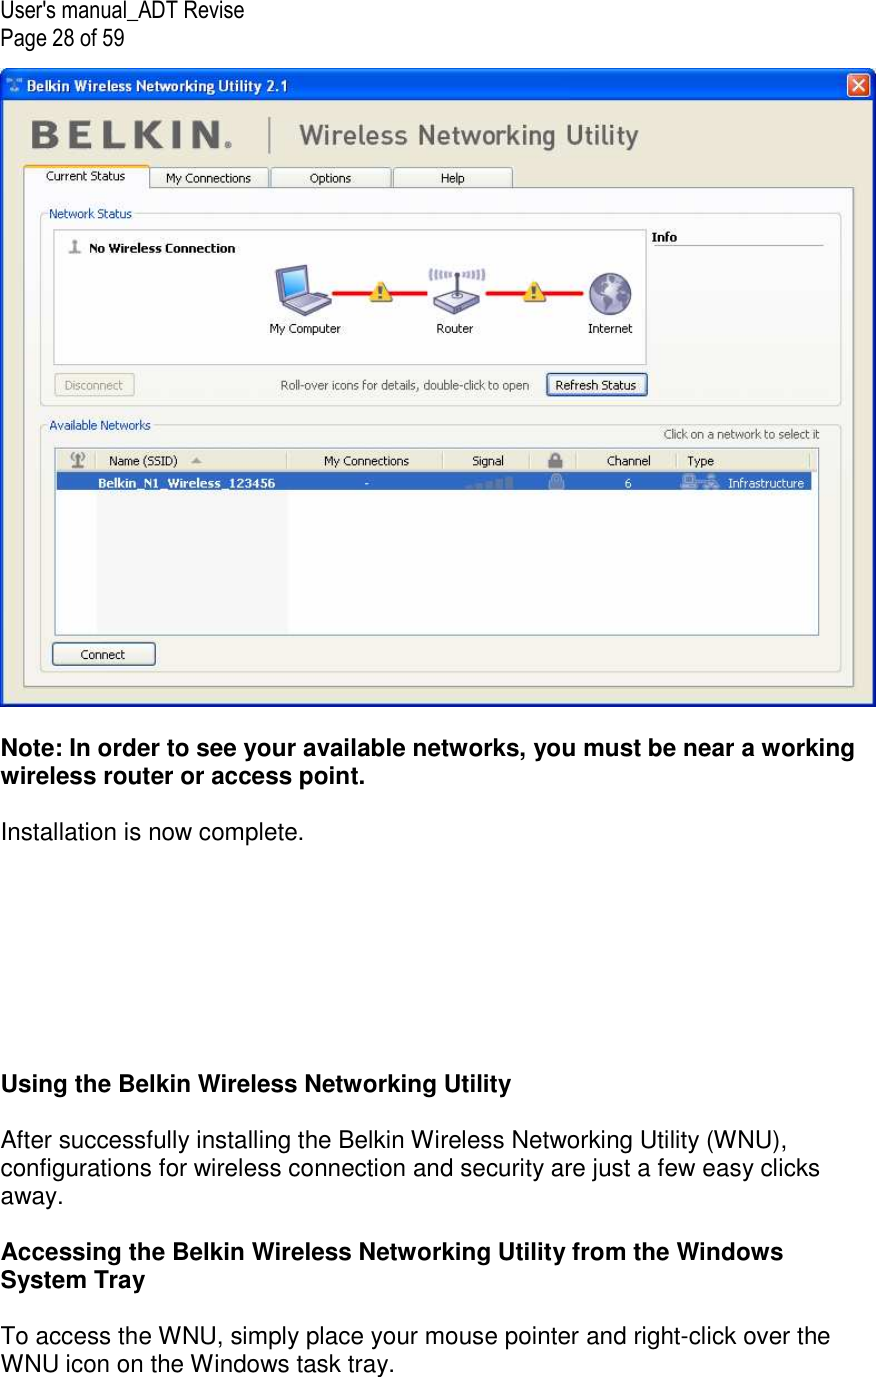 User&apos;s manual_ADT Revise Page 28 of 59   Note: In order to see your available networks, you must be near a working wireless router or access point.  Installation is now complete.         Using the Belkin Wireless Networking Utility   After successfully installing the Belkin Wireless Networking Utility (WNU), configurations for wireless connection and security are just a few easy clicks away.  Accessing the Belkin Wireless Networking Utility from the Windows System Tray  To access the WNU, simply place your mouse pointer and right-click over the WNU icon on the Windows task tray.  